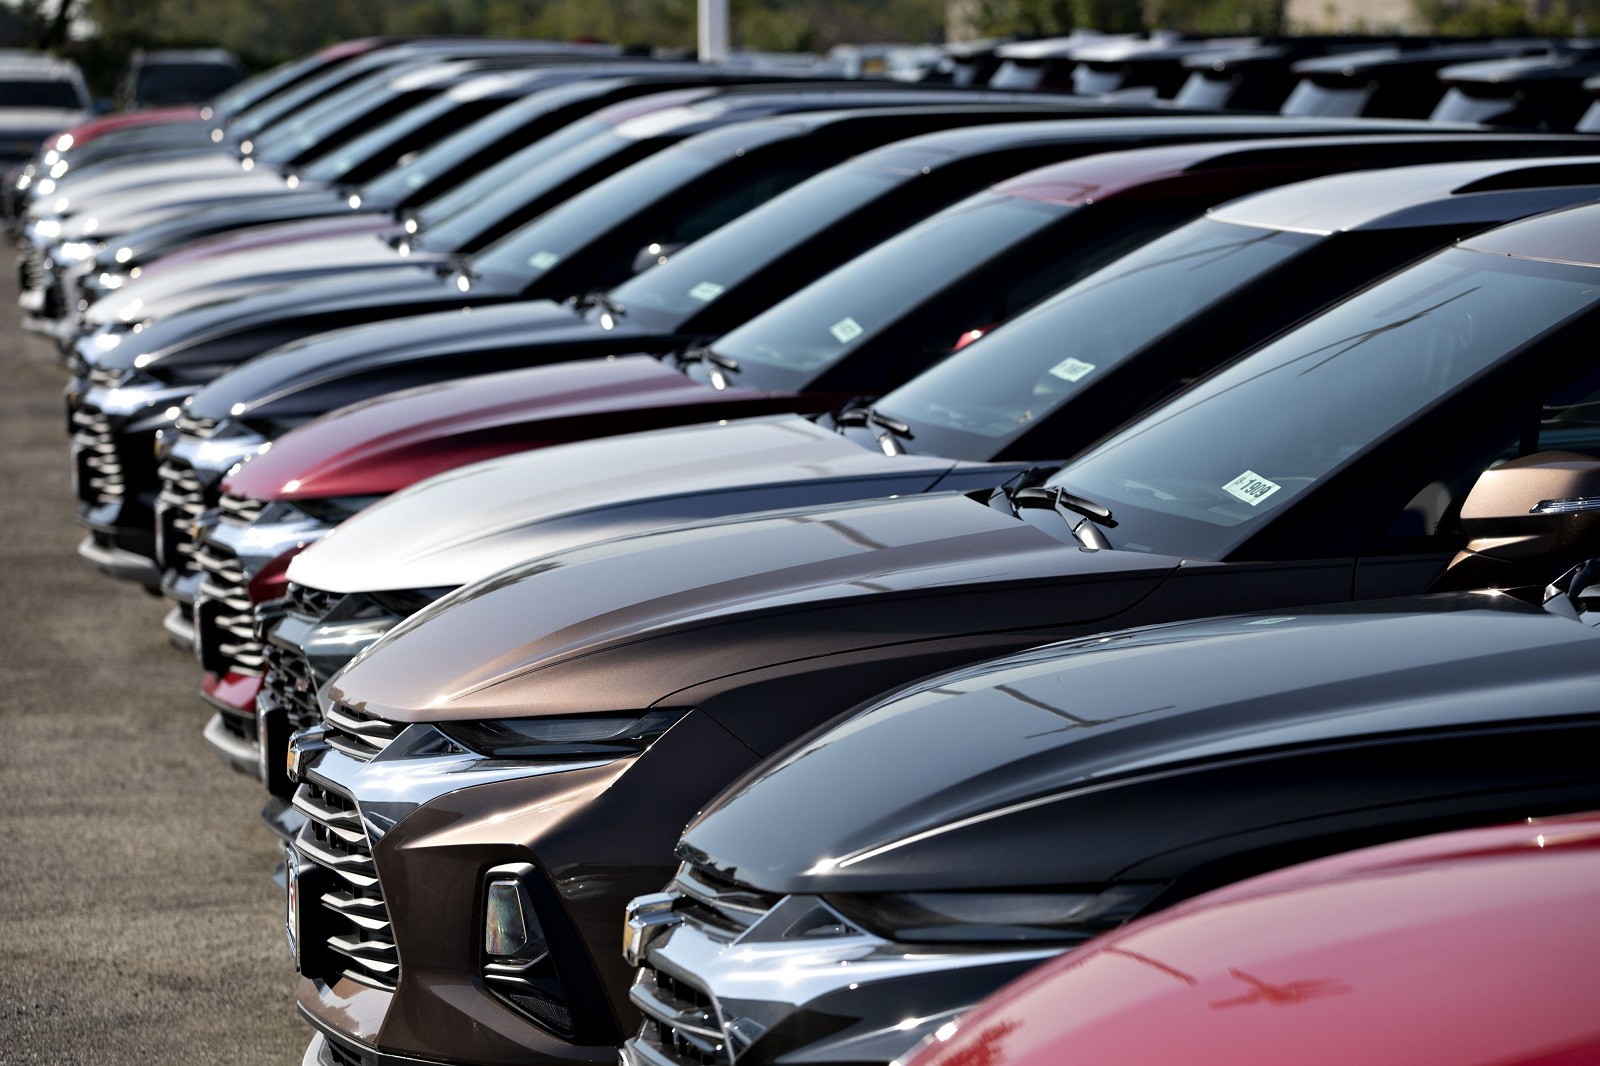 General Motors' strike impact flows through its supply chain Insights